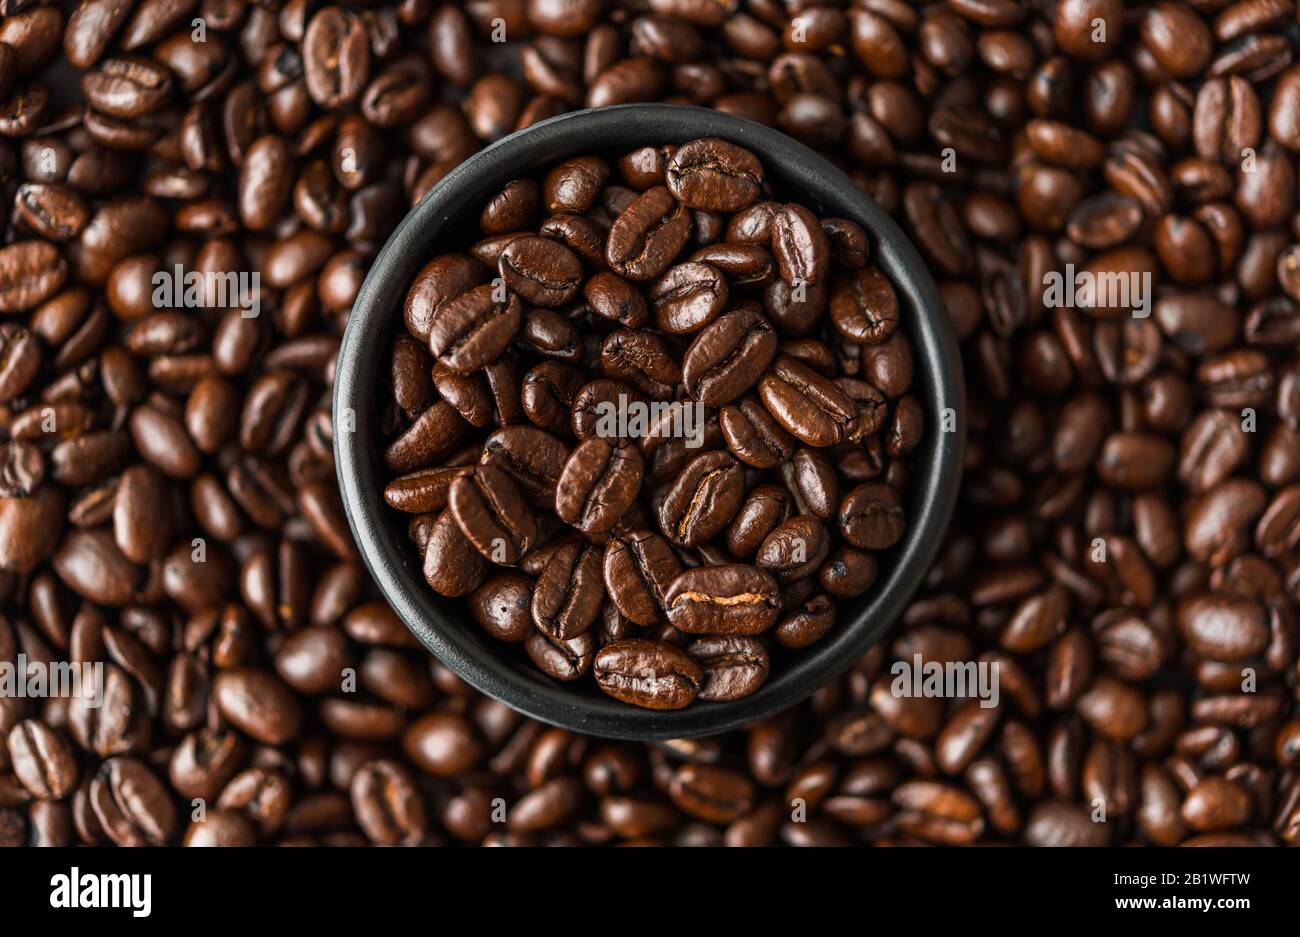 Roasted coffee beans in a black bowl. Stock Photo